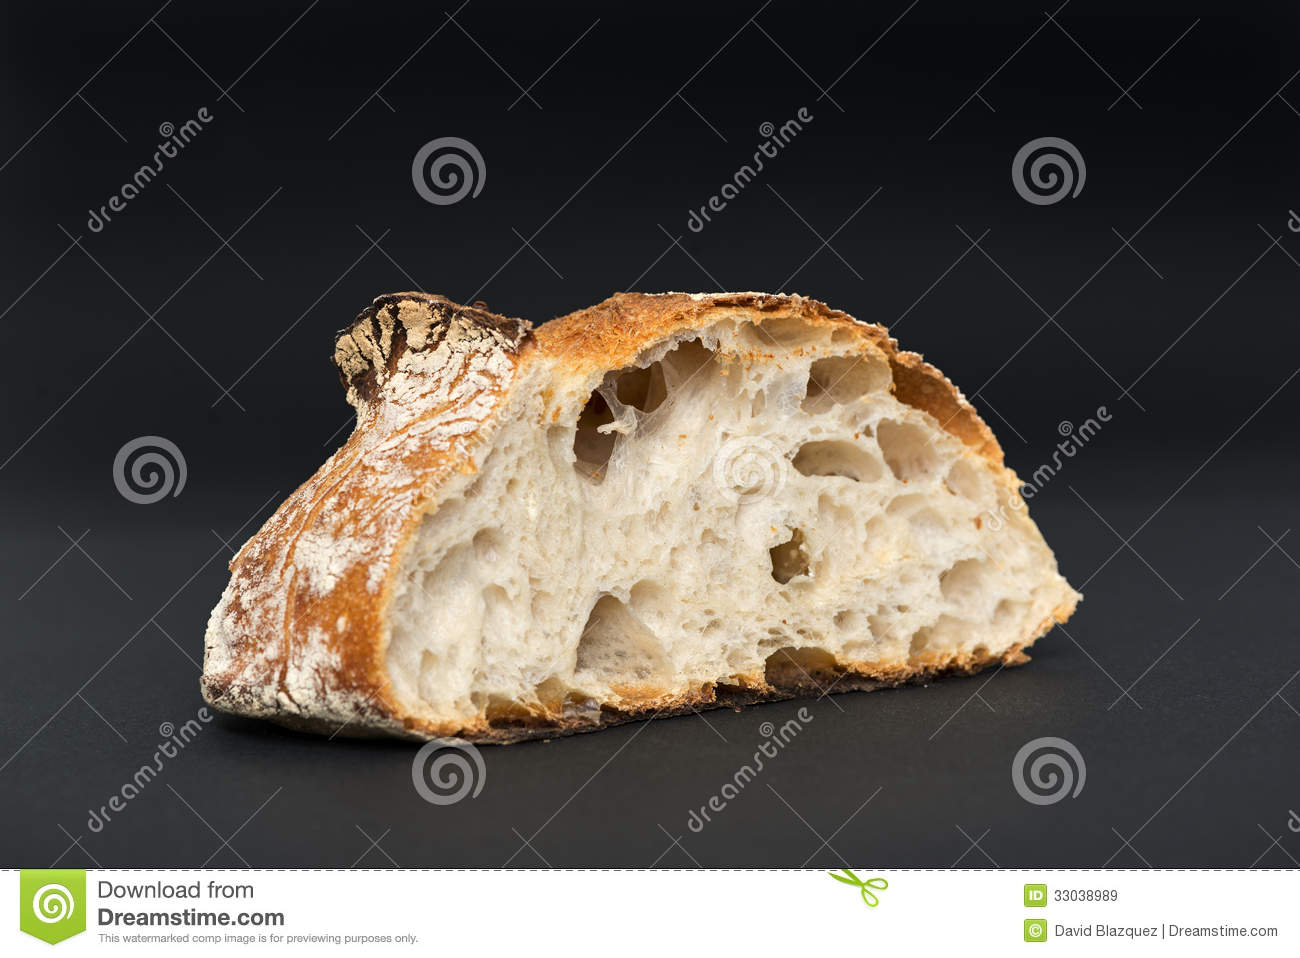 Artisan Bread Royalty Free Stock Images   Image  33038989